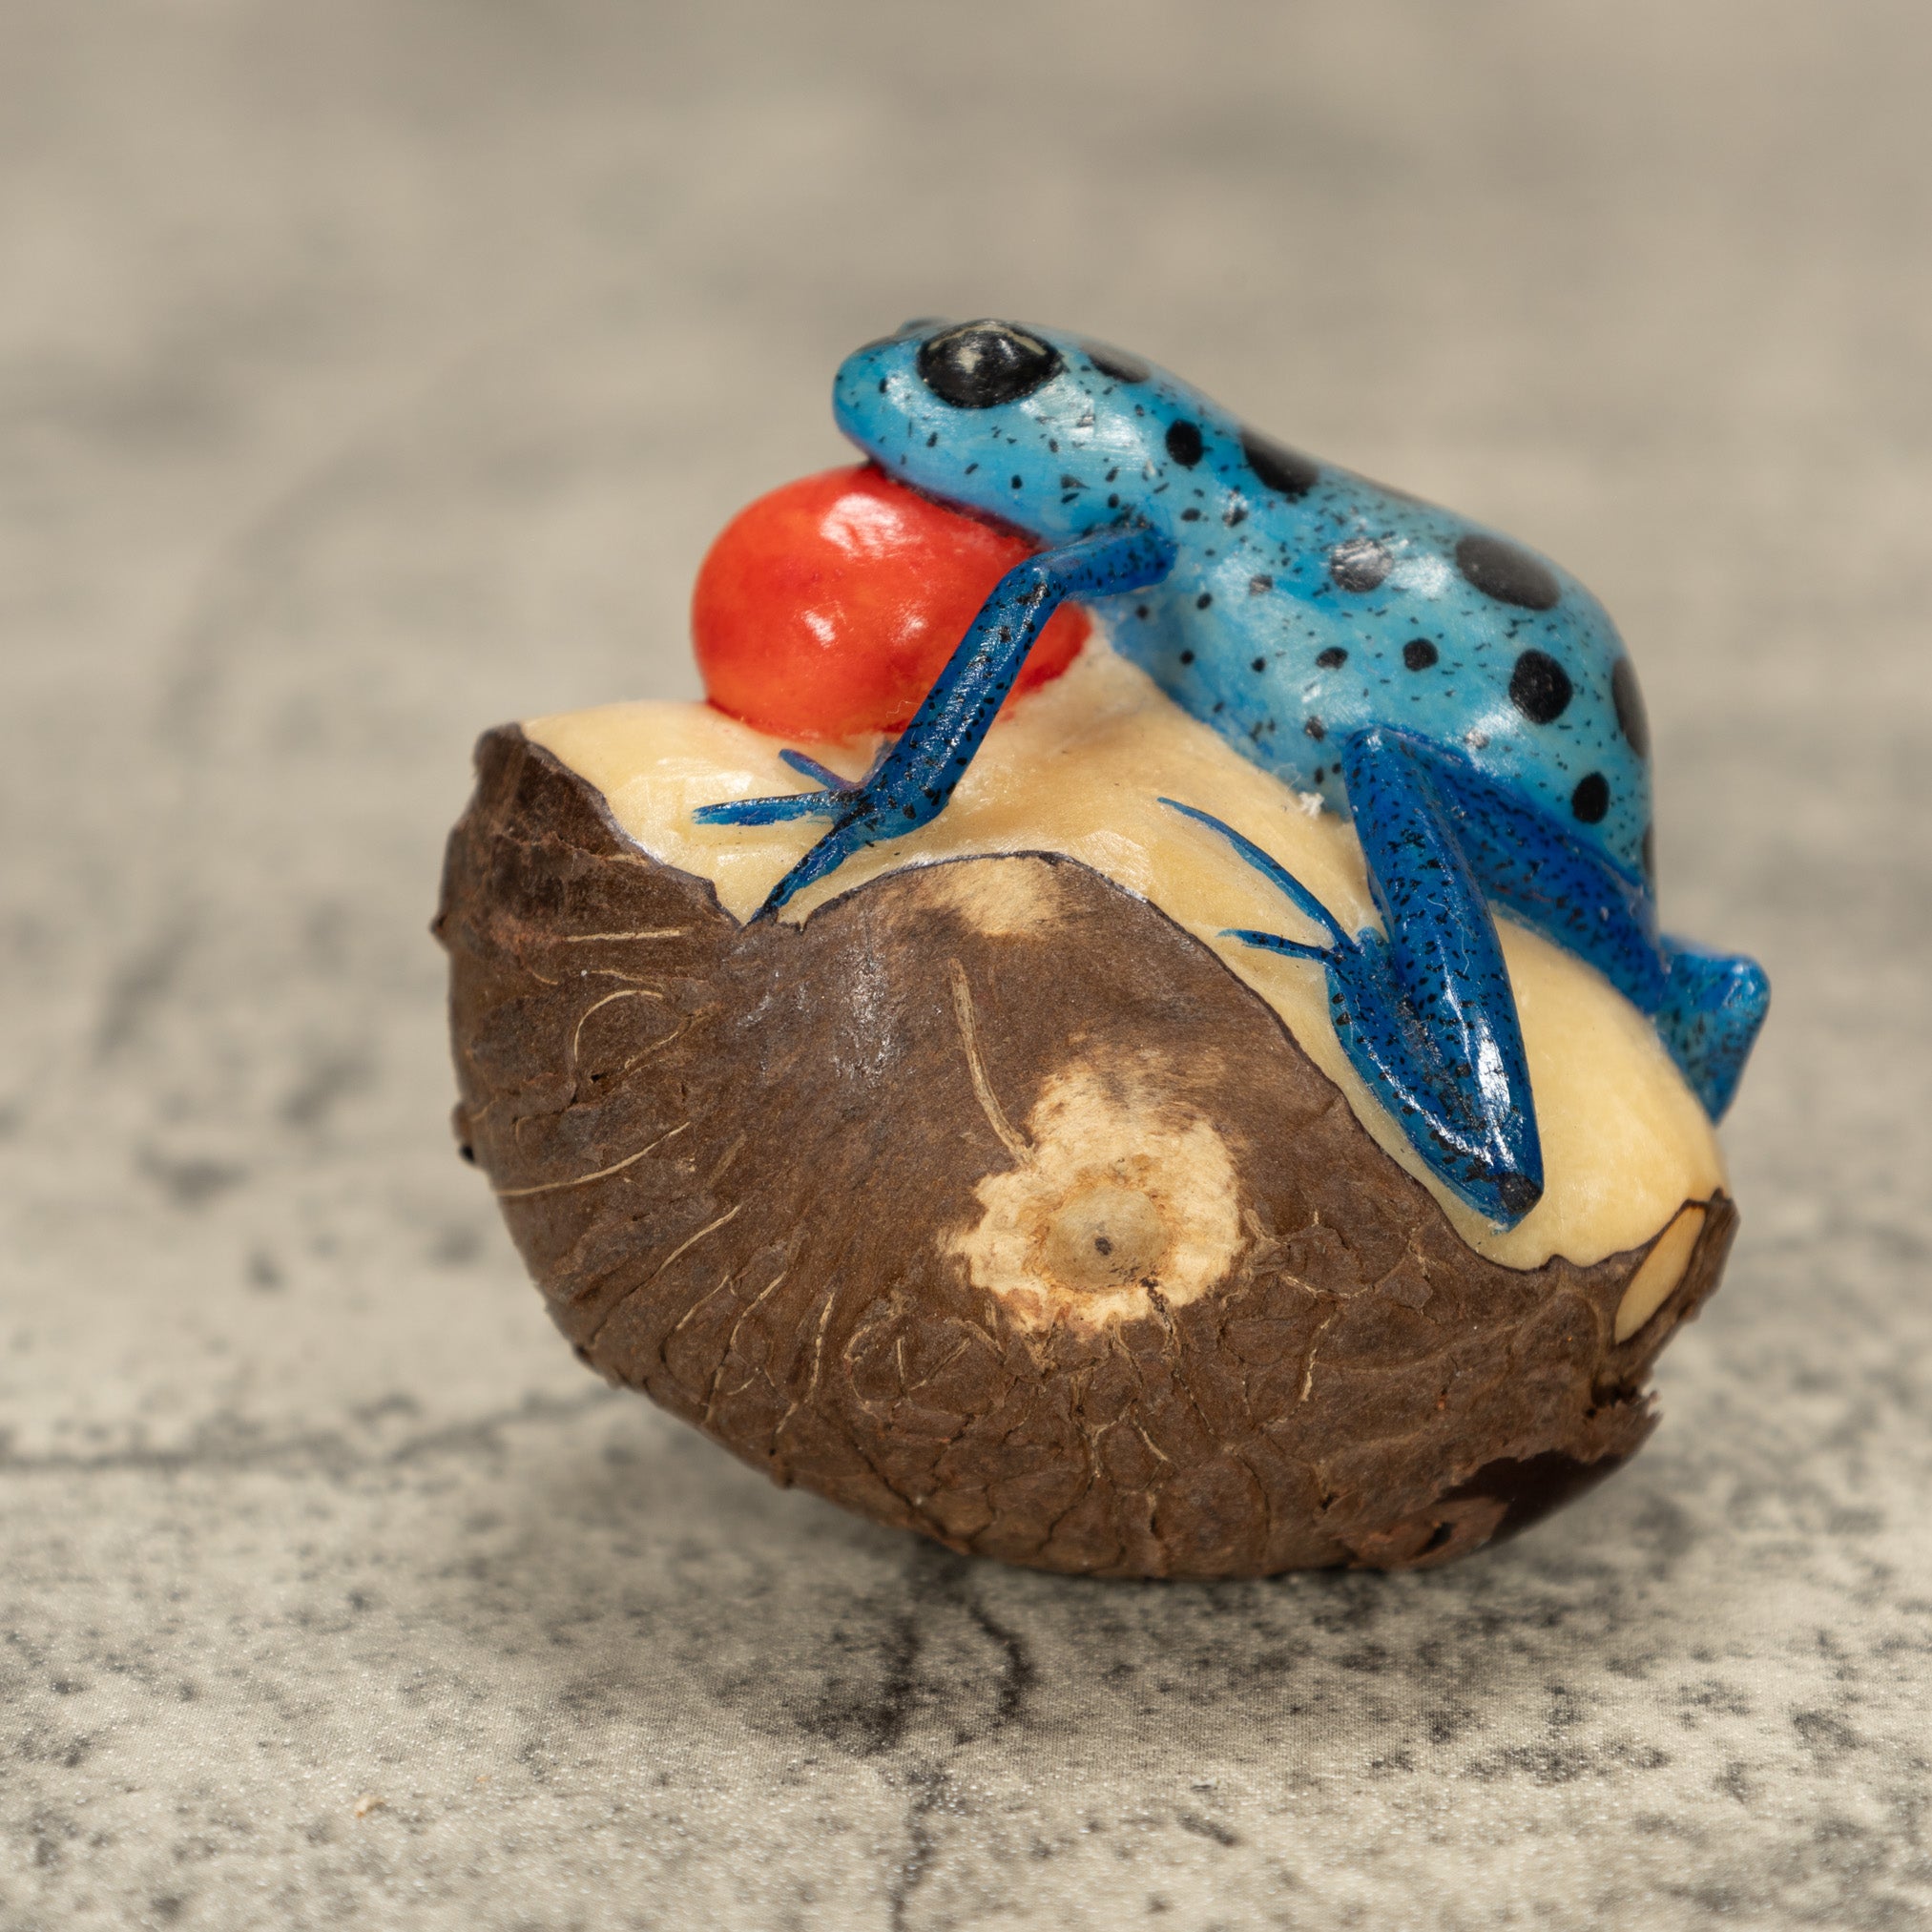 Blowthroat Poison Dart Frog Tagua Nut Carving